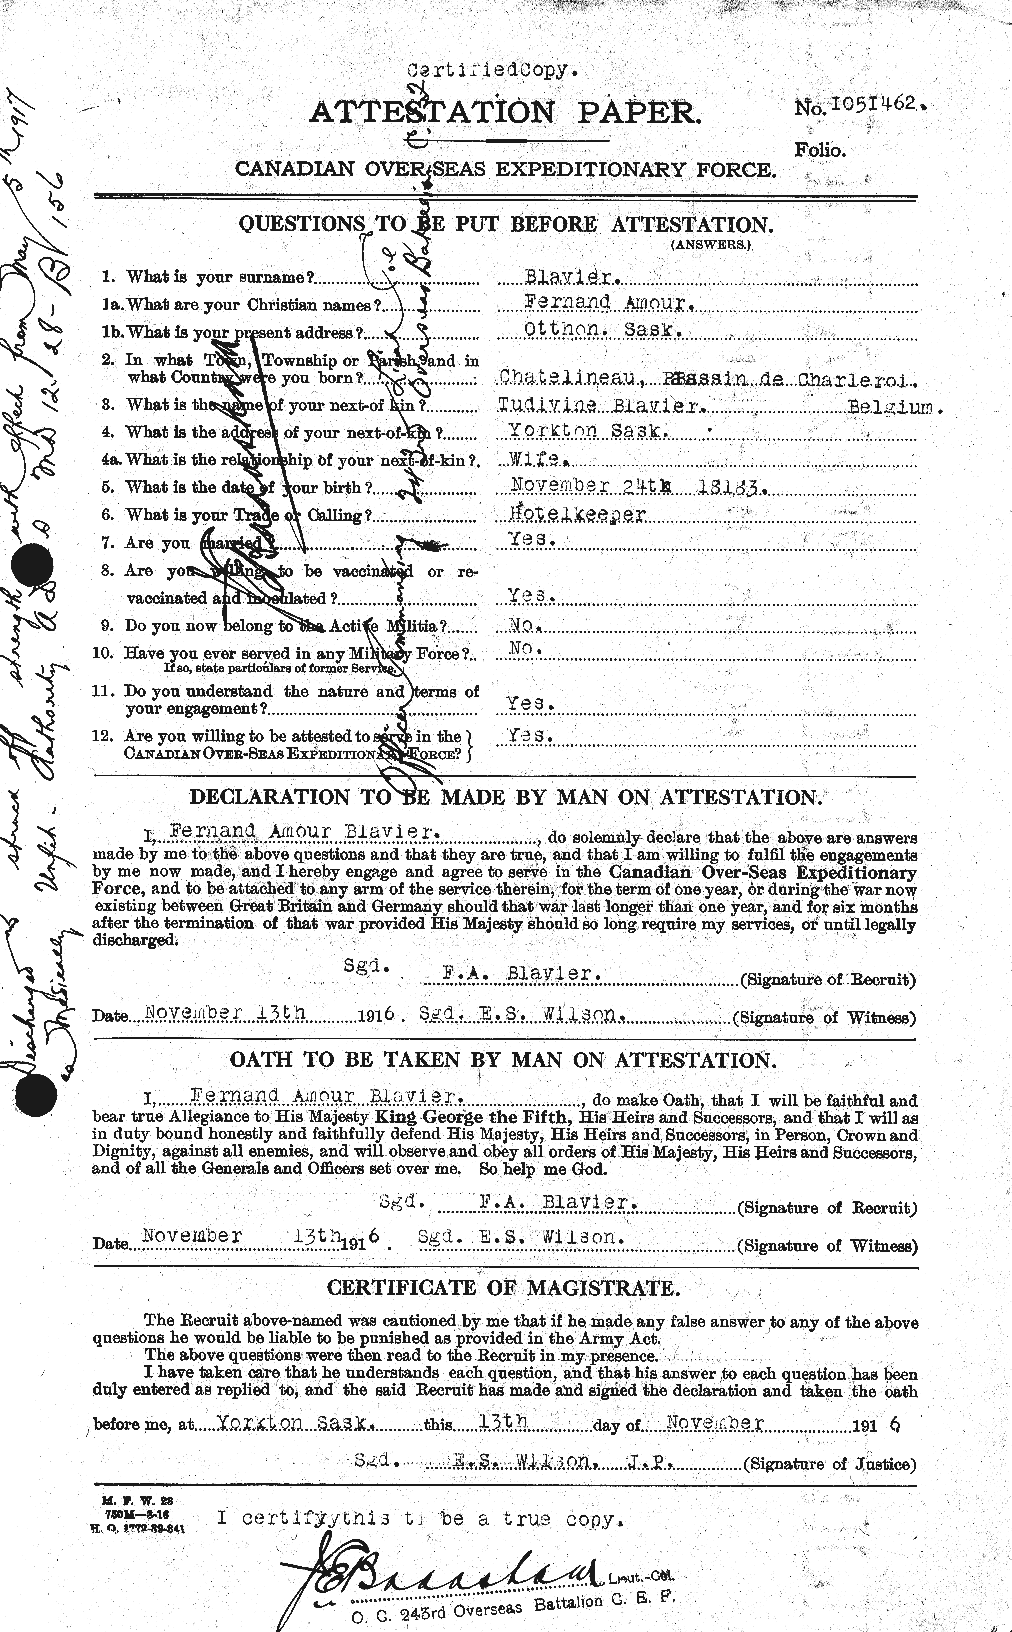 Personnel Records of the First World War - CEF 247834a